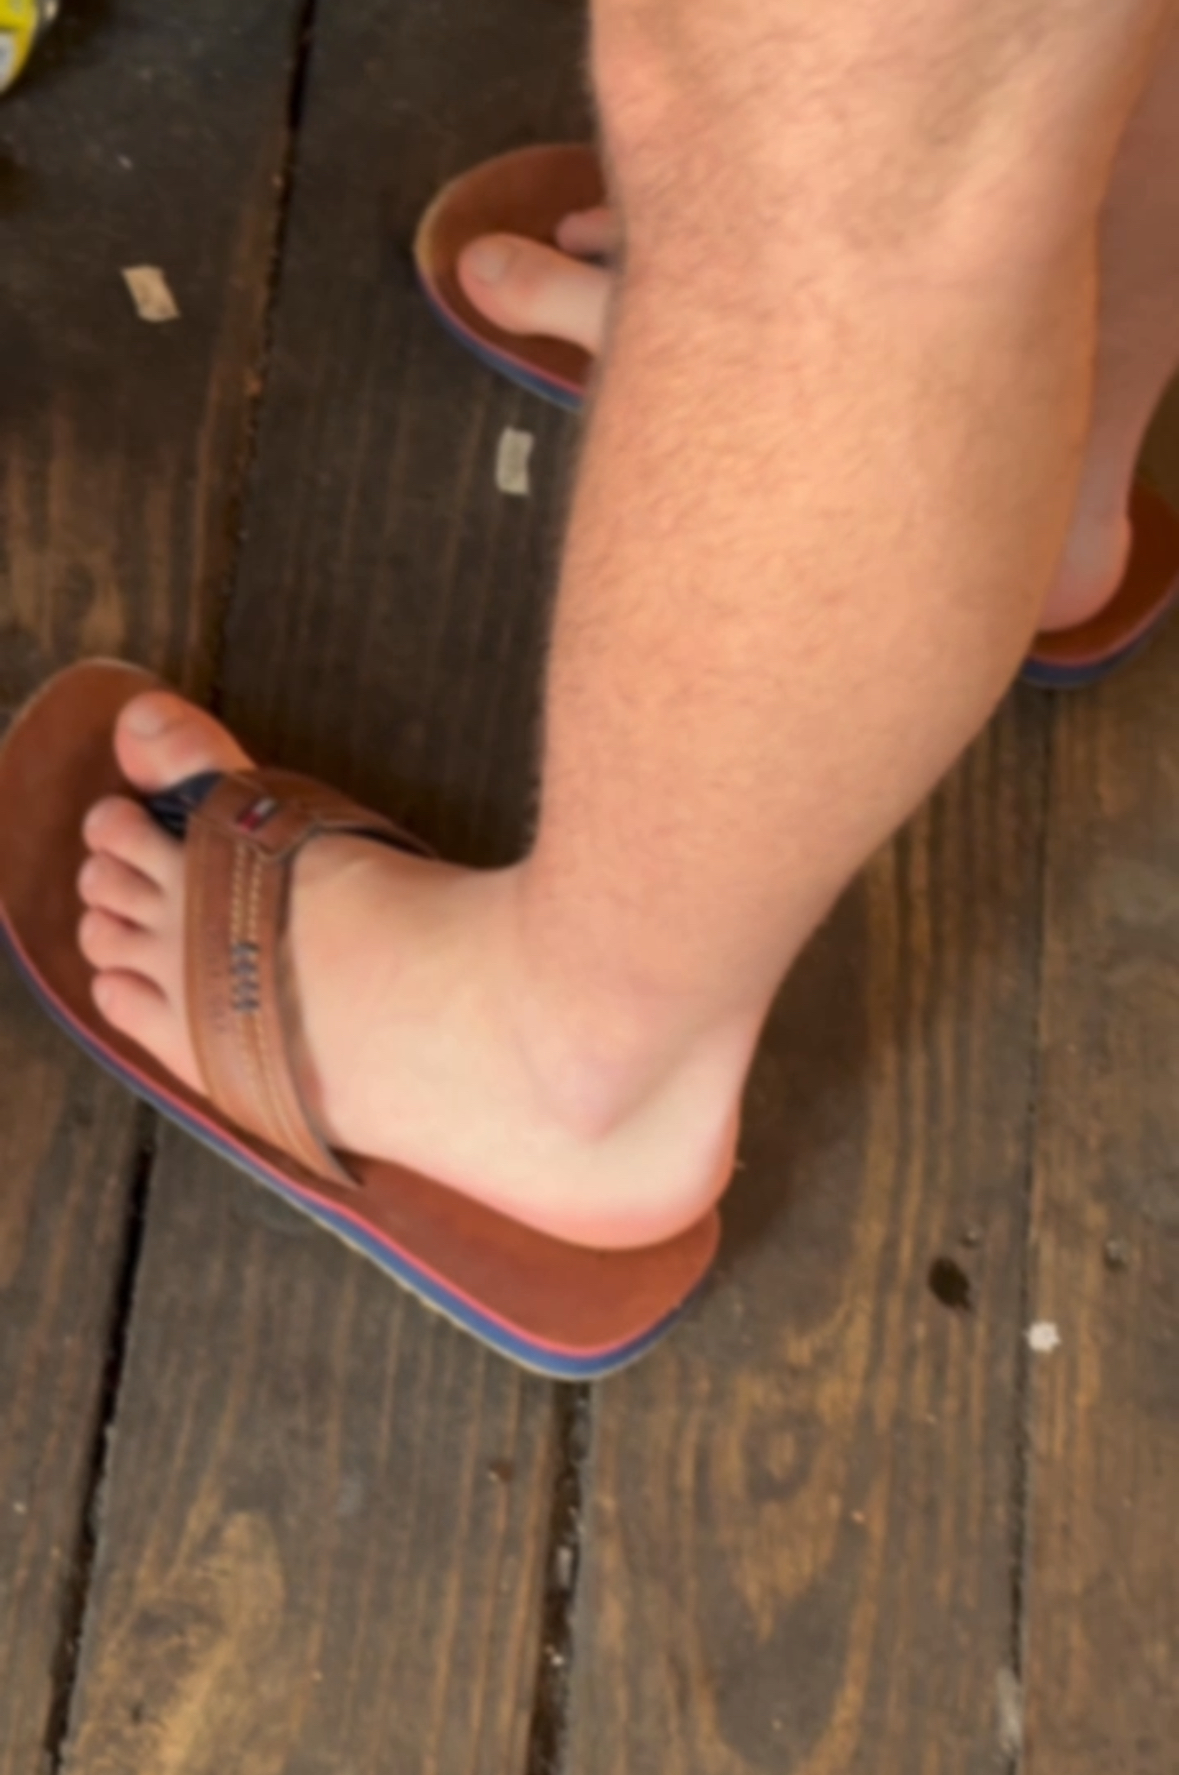 Gorgeous guy’s feet with fat toes